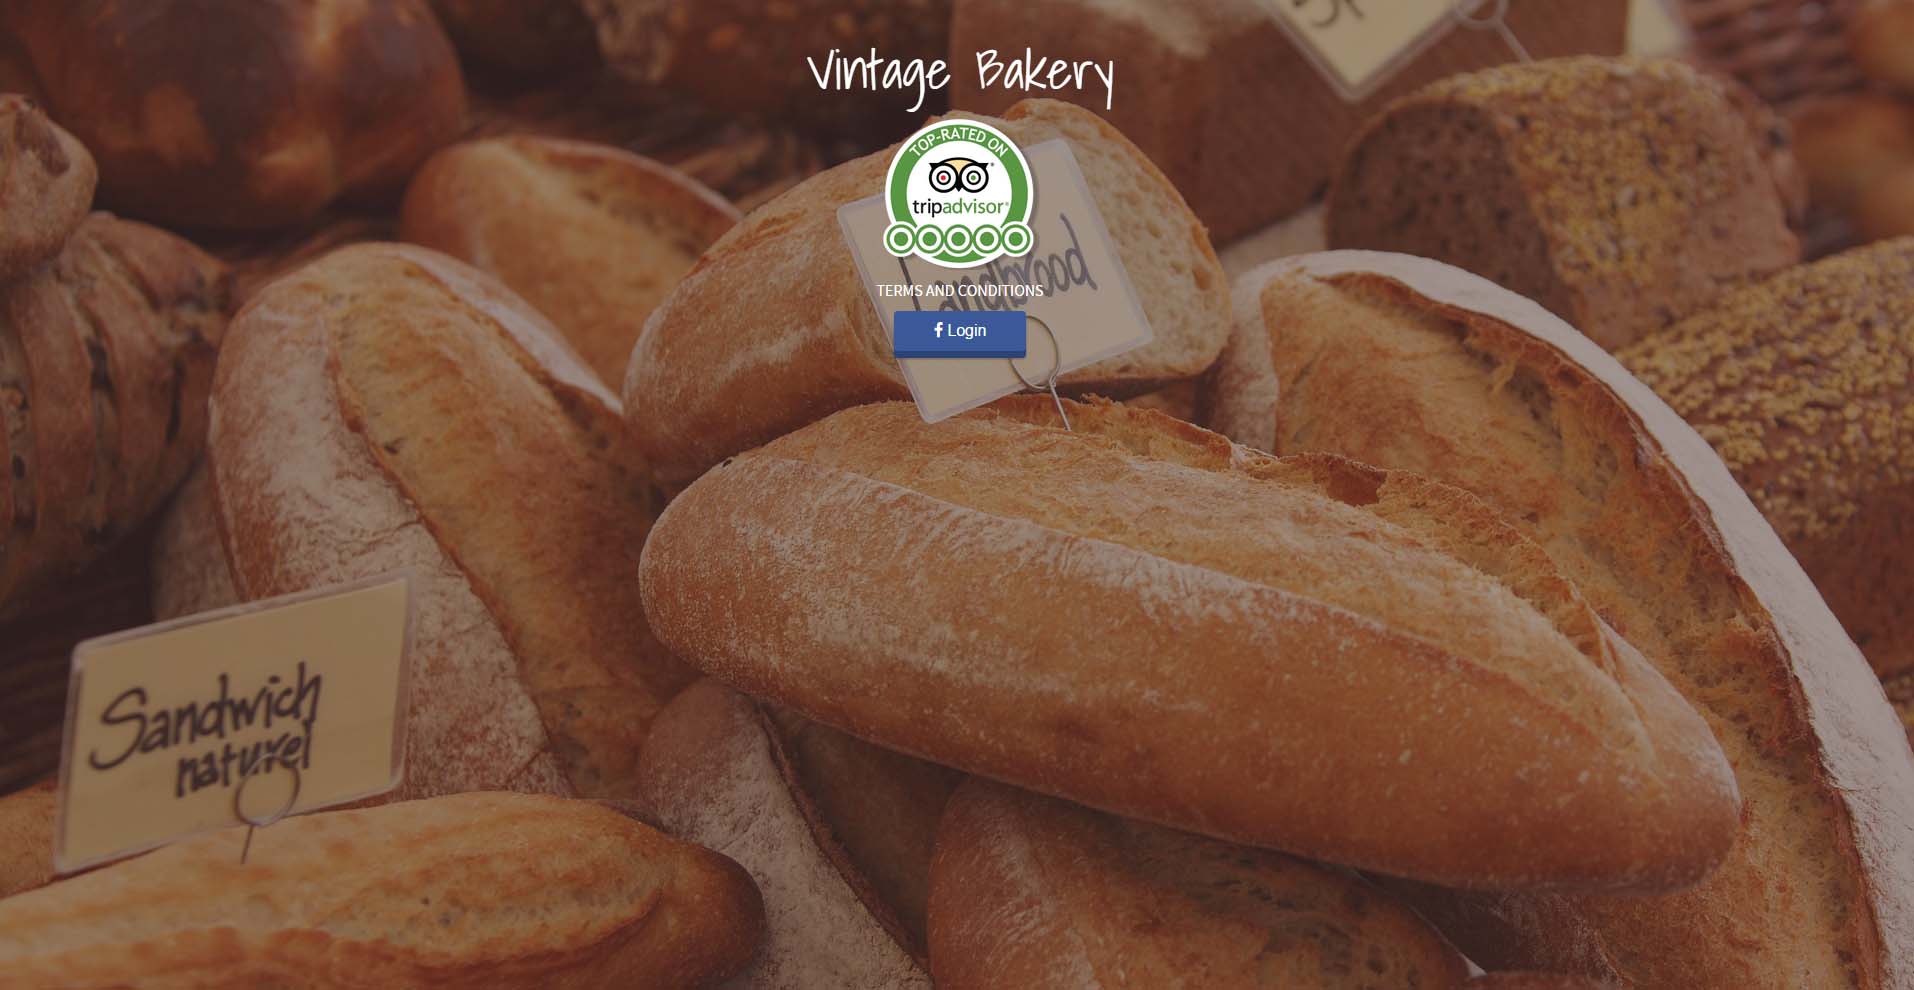 WiFi for Vintage Bakery